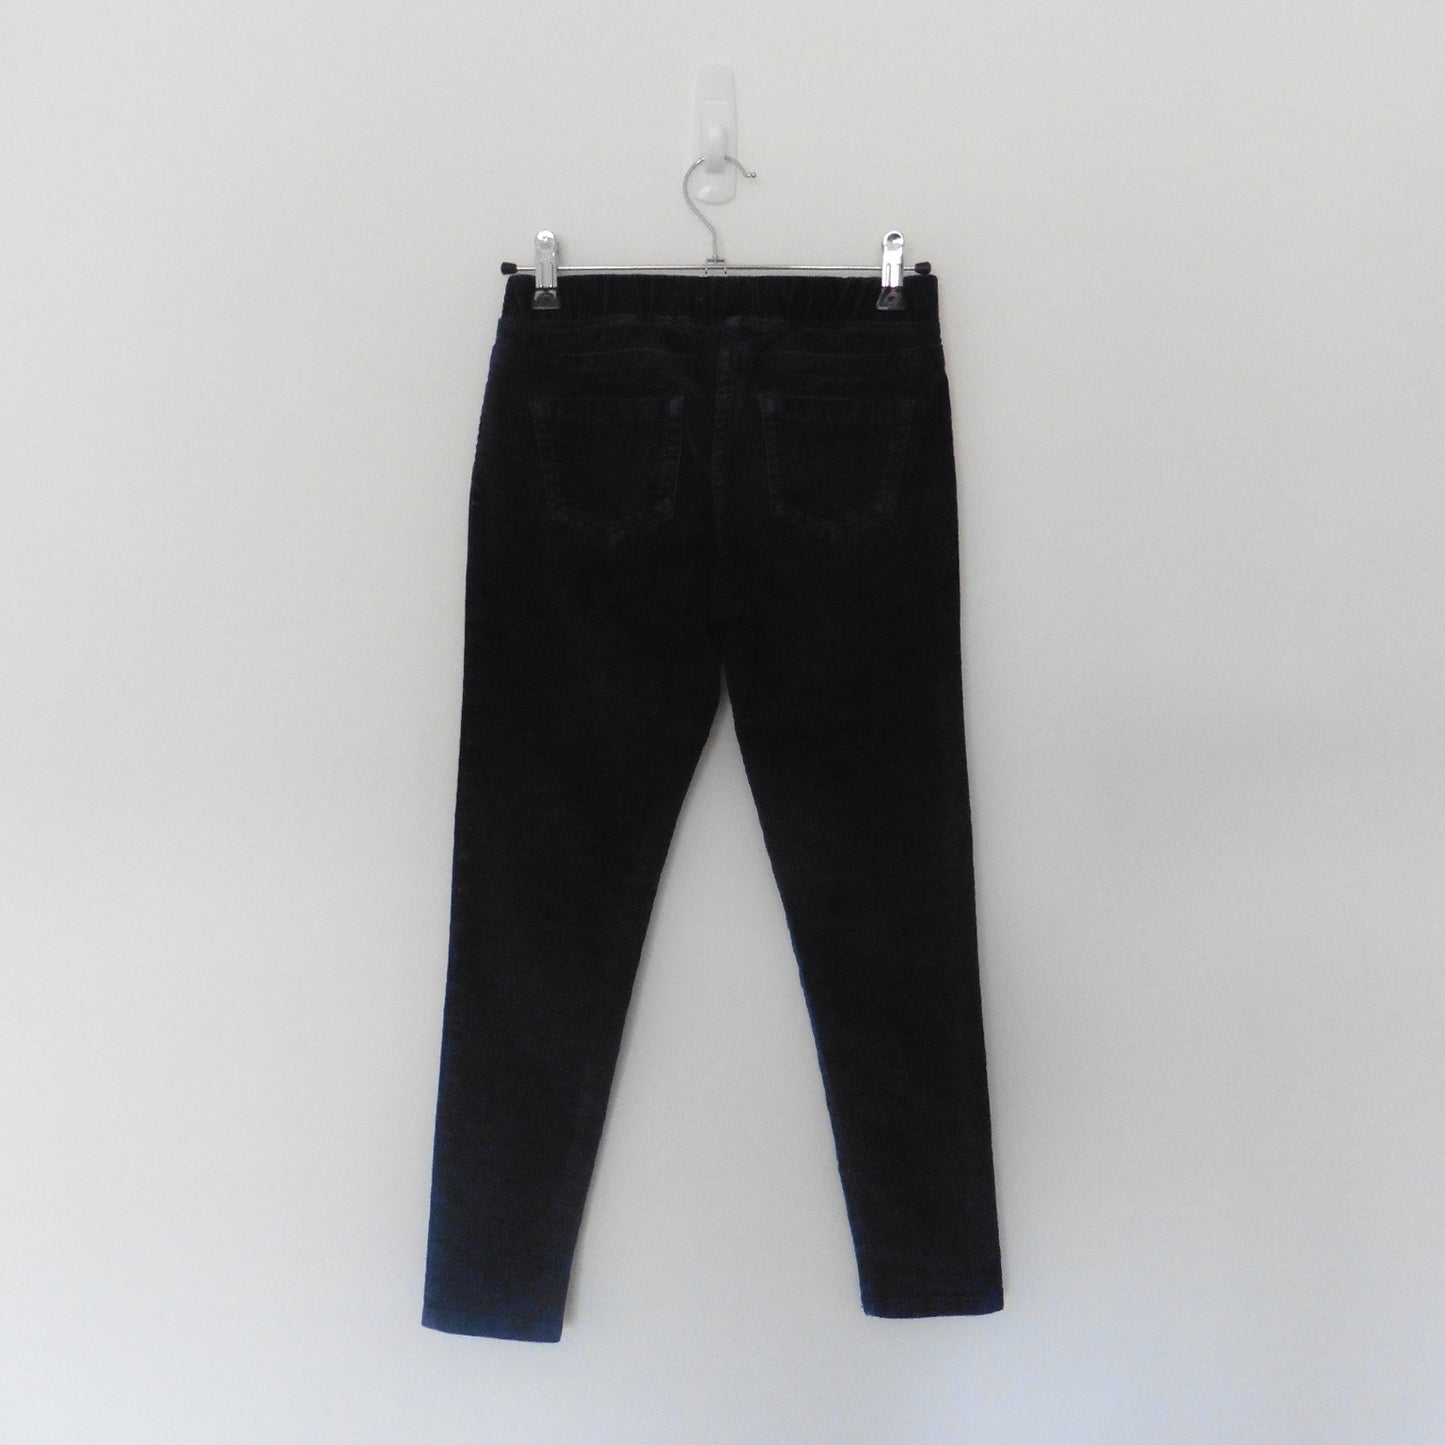 Boden Navy Cord Trousers 9y